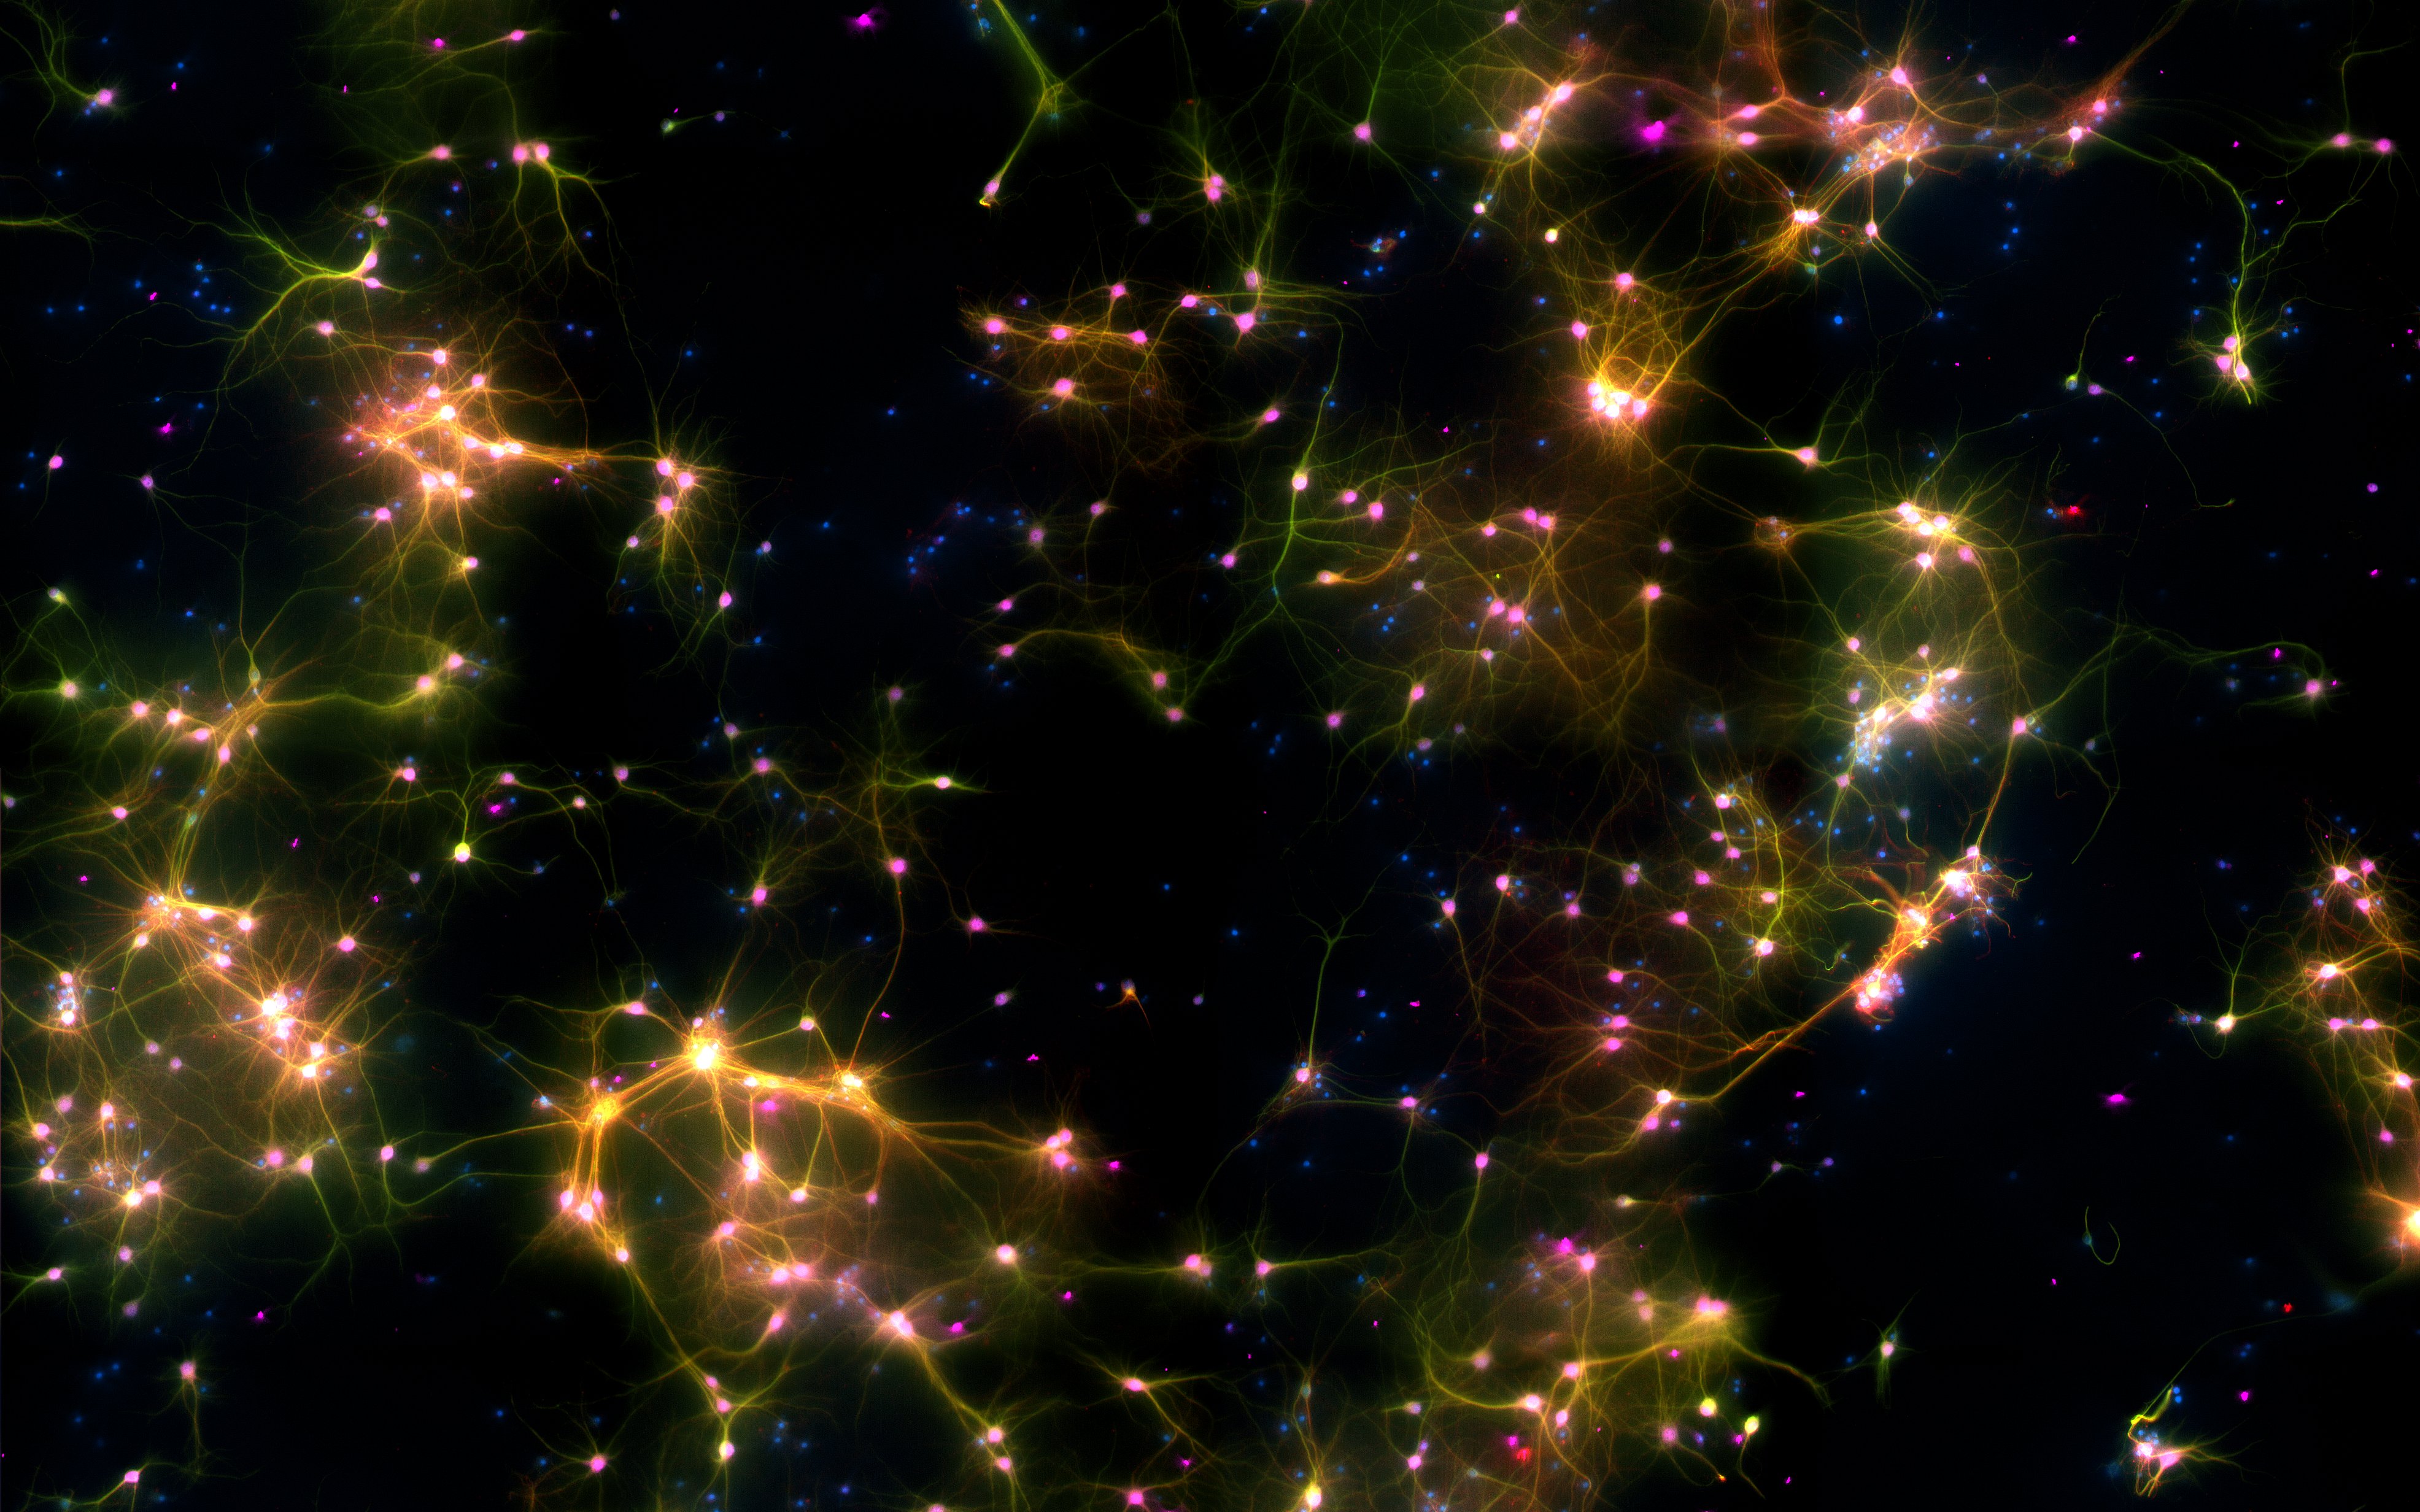 Dishbrain under the microscope. A microscopy image of neural cells where fluorescent markers show different types of cells. Green marks neurons and axons, purple marks neurons, red marks dendrites, and blue marks all cells. Where multiple markers are present, colours are merged and typically appear as yellow or pink depending on the proportion of markers. Credit Cortical Labs